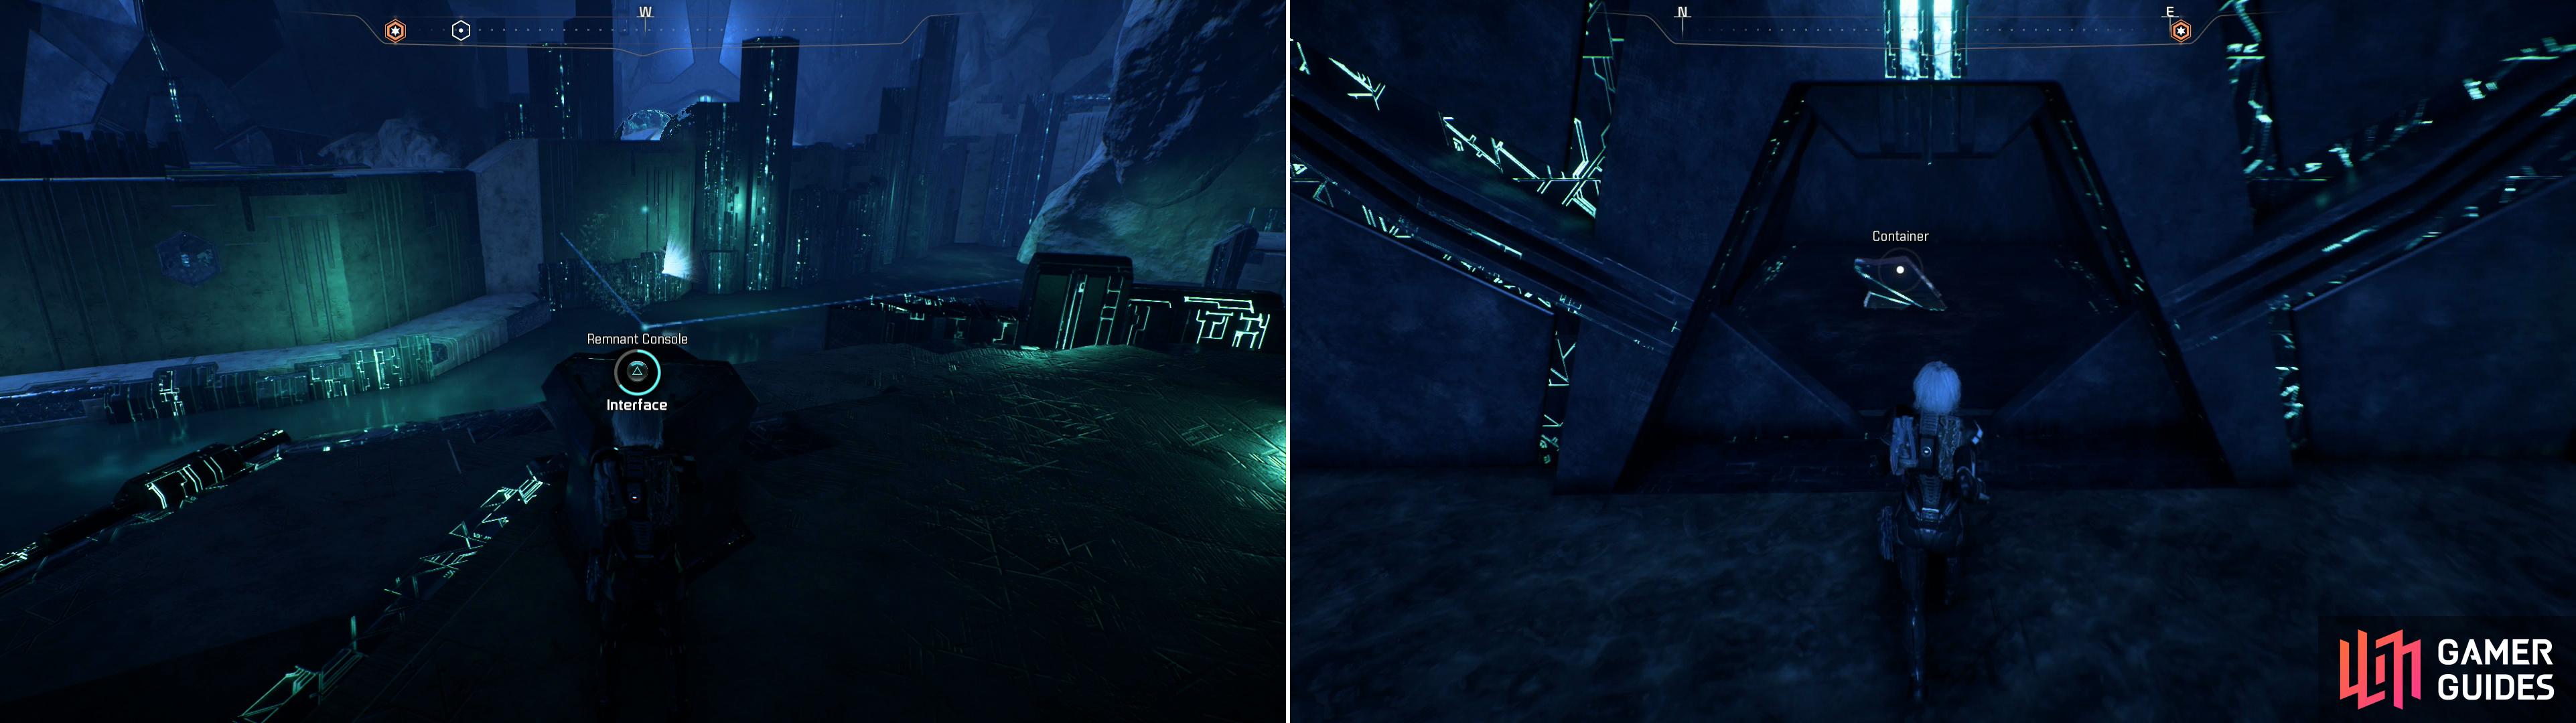 Activate another Remnant Console to provide you a way back across the ferrofluid moat (left) then loot the treasure chamber you opened earlier (right).